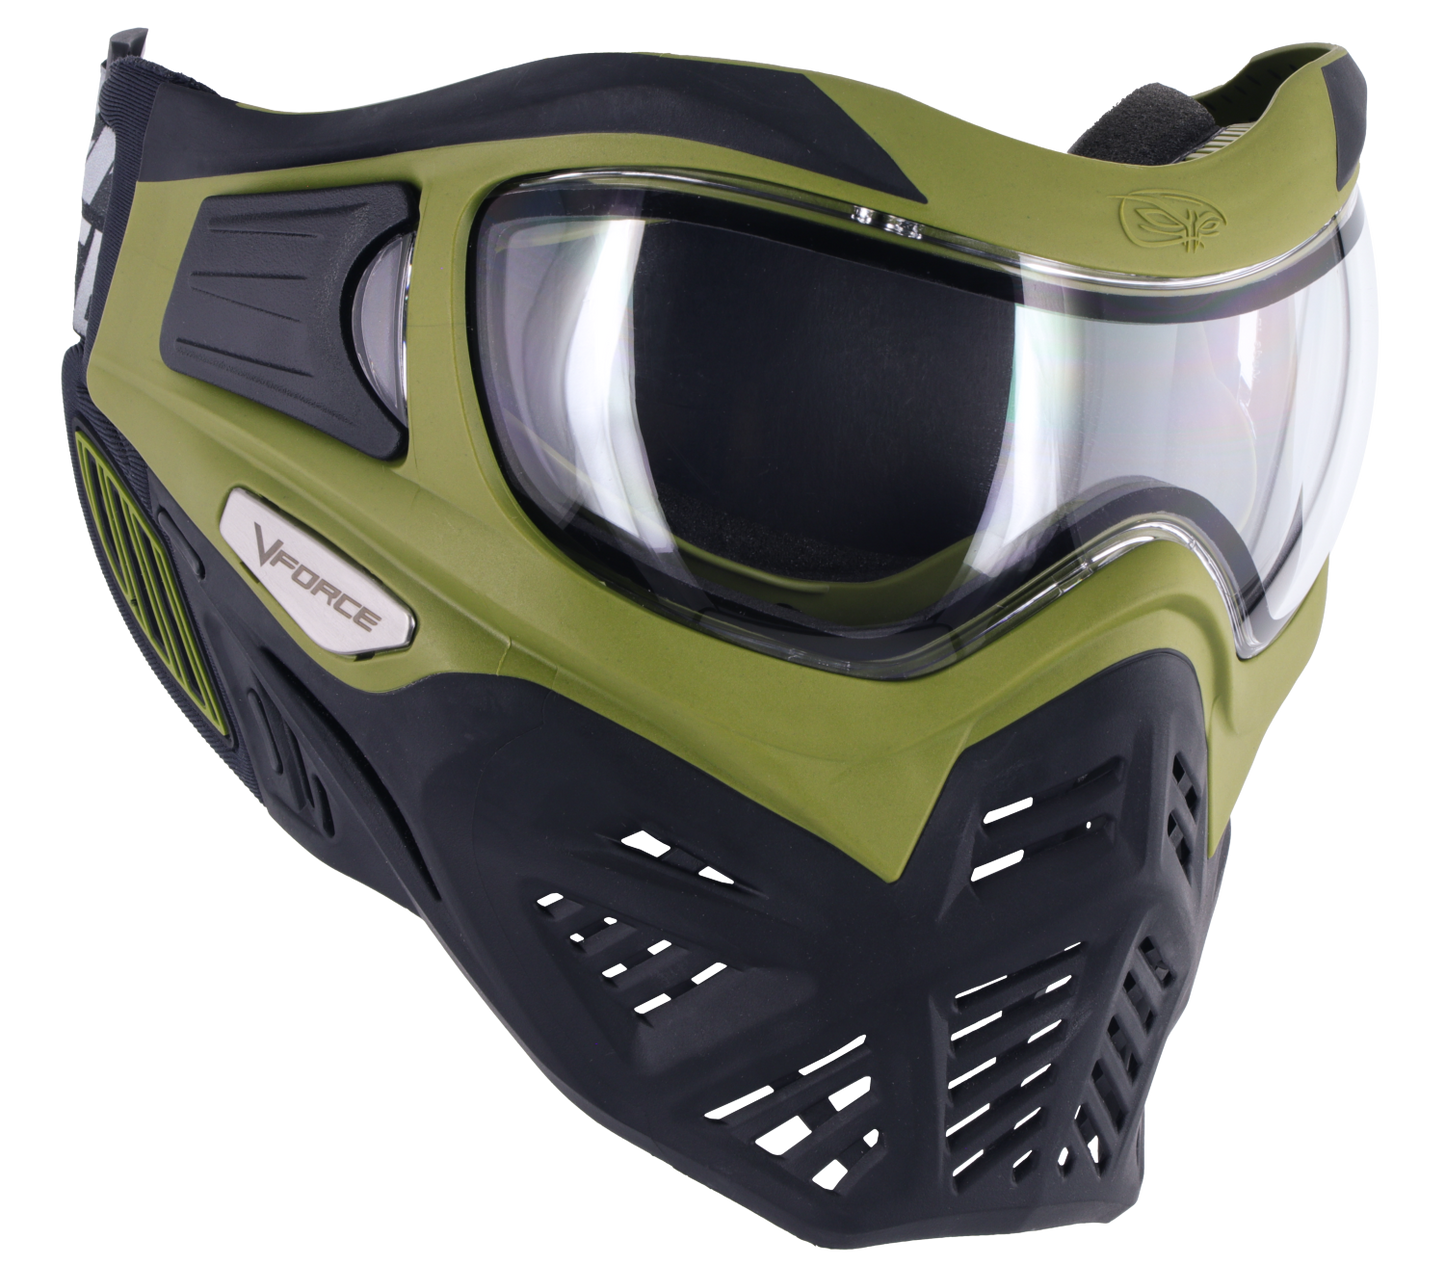 V-Force Grill 2.0 Paintball Goggle - Thermal Clear Lens - Crocodile (Olive/Black)